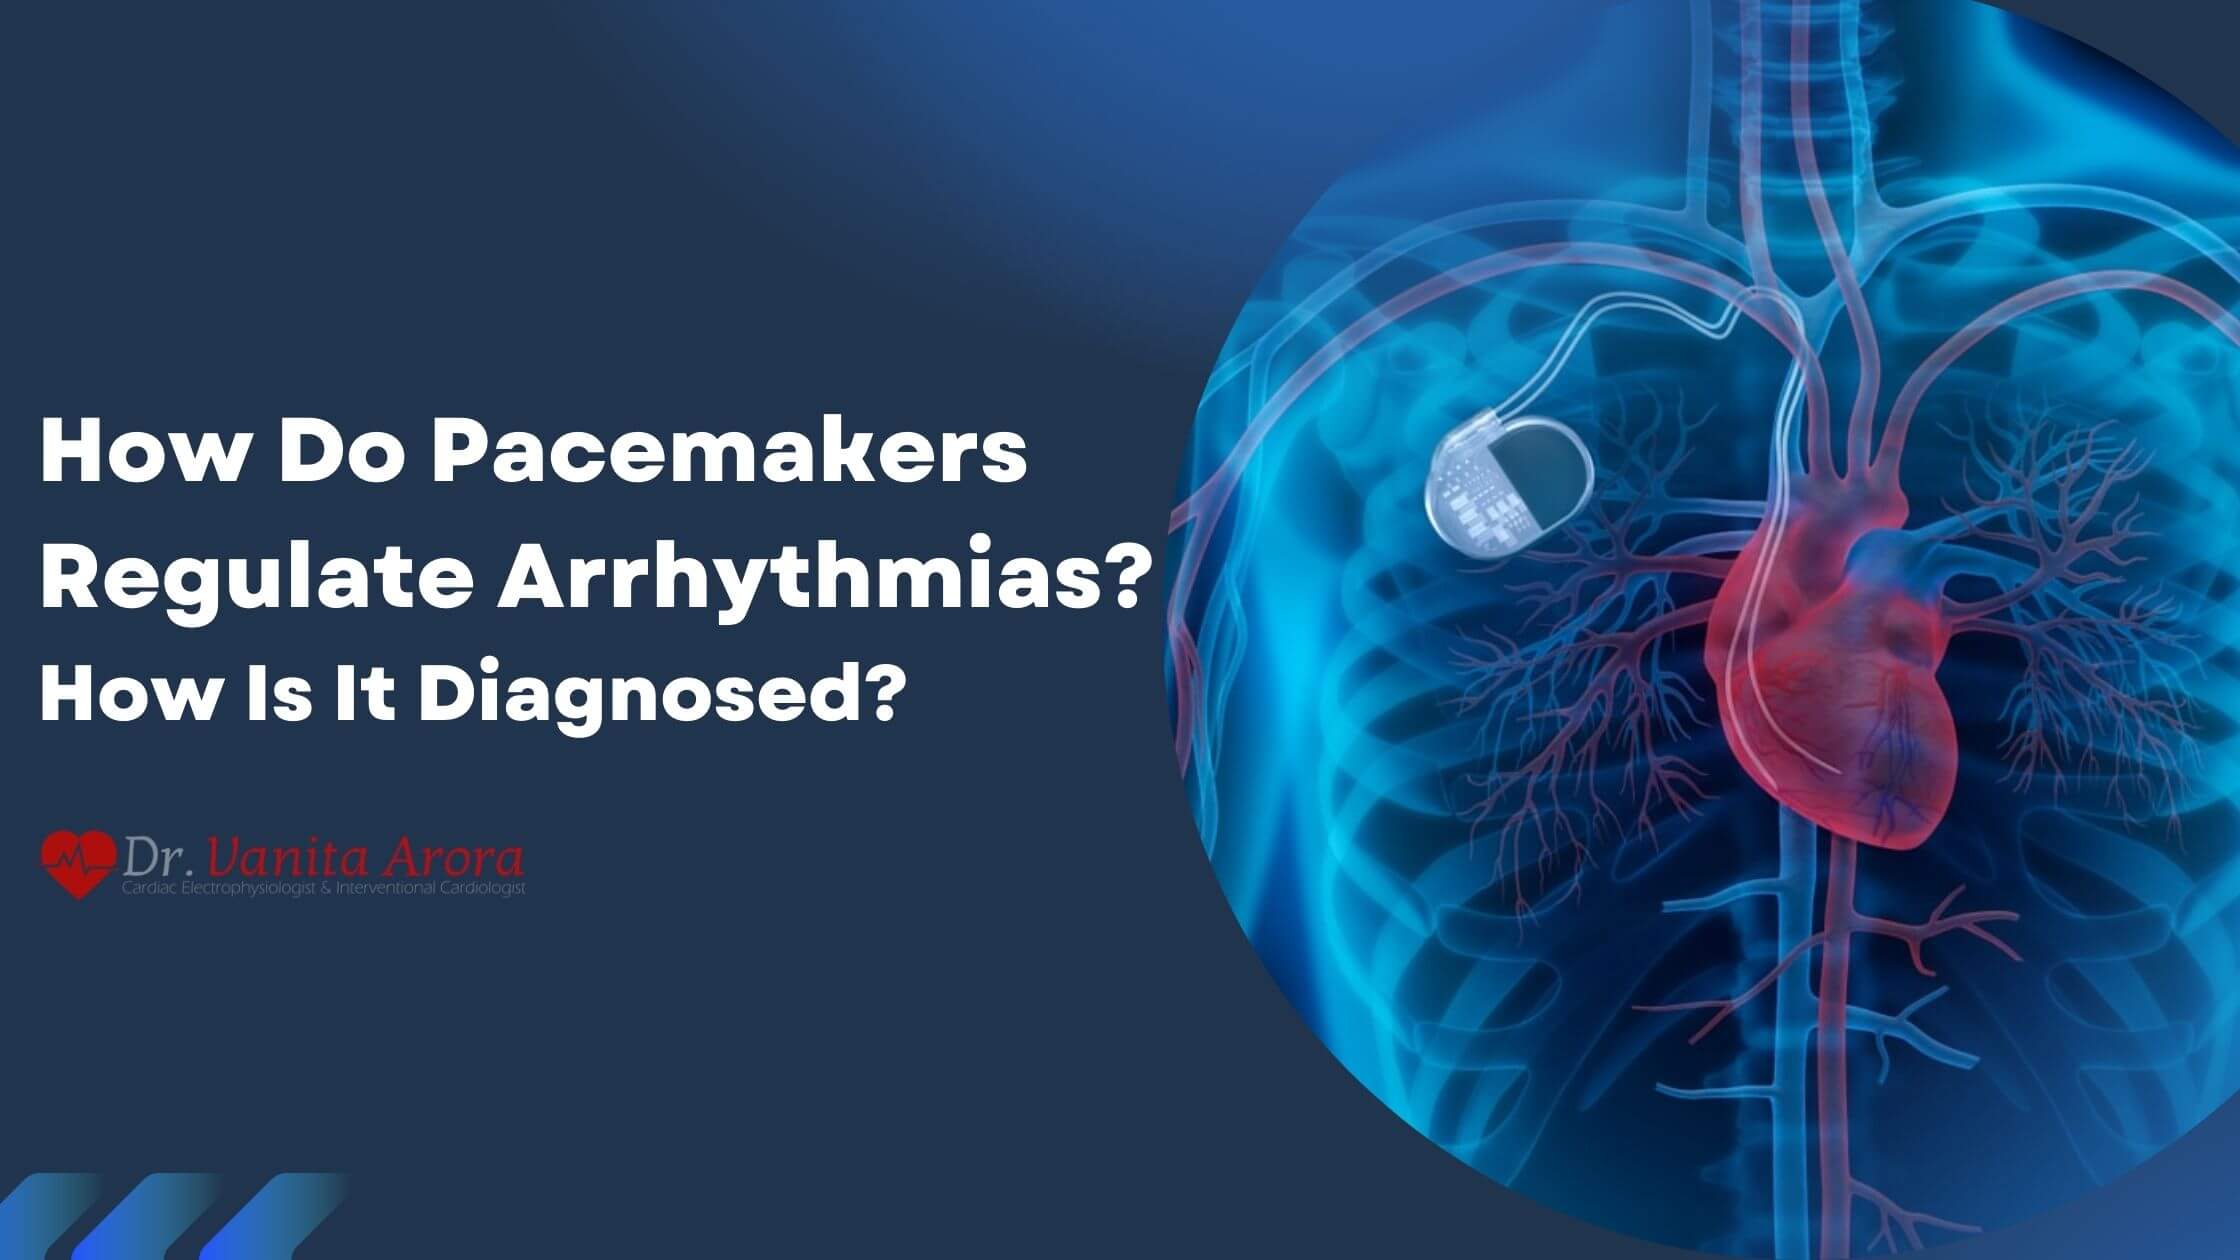 How Do Pacemakers Regulate Arrhythmias? How Is It Diagnosed?